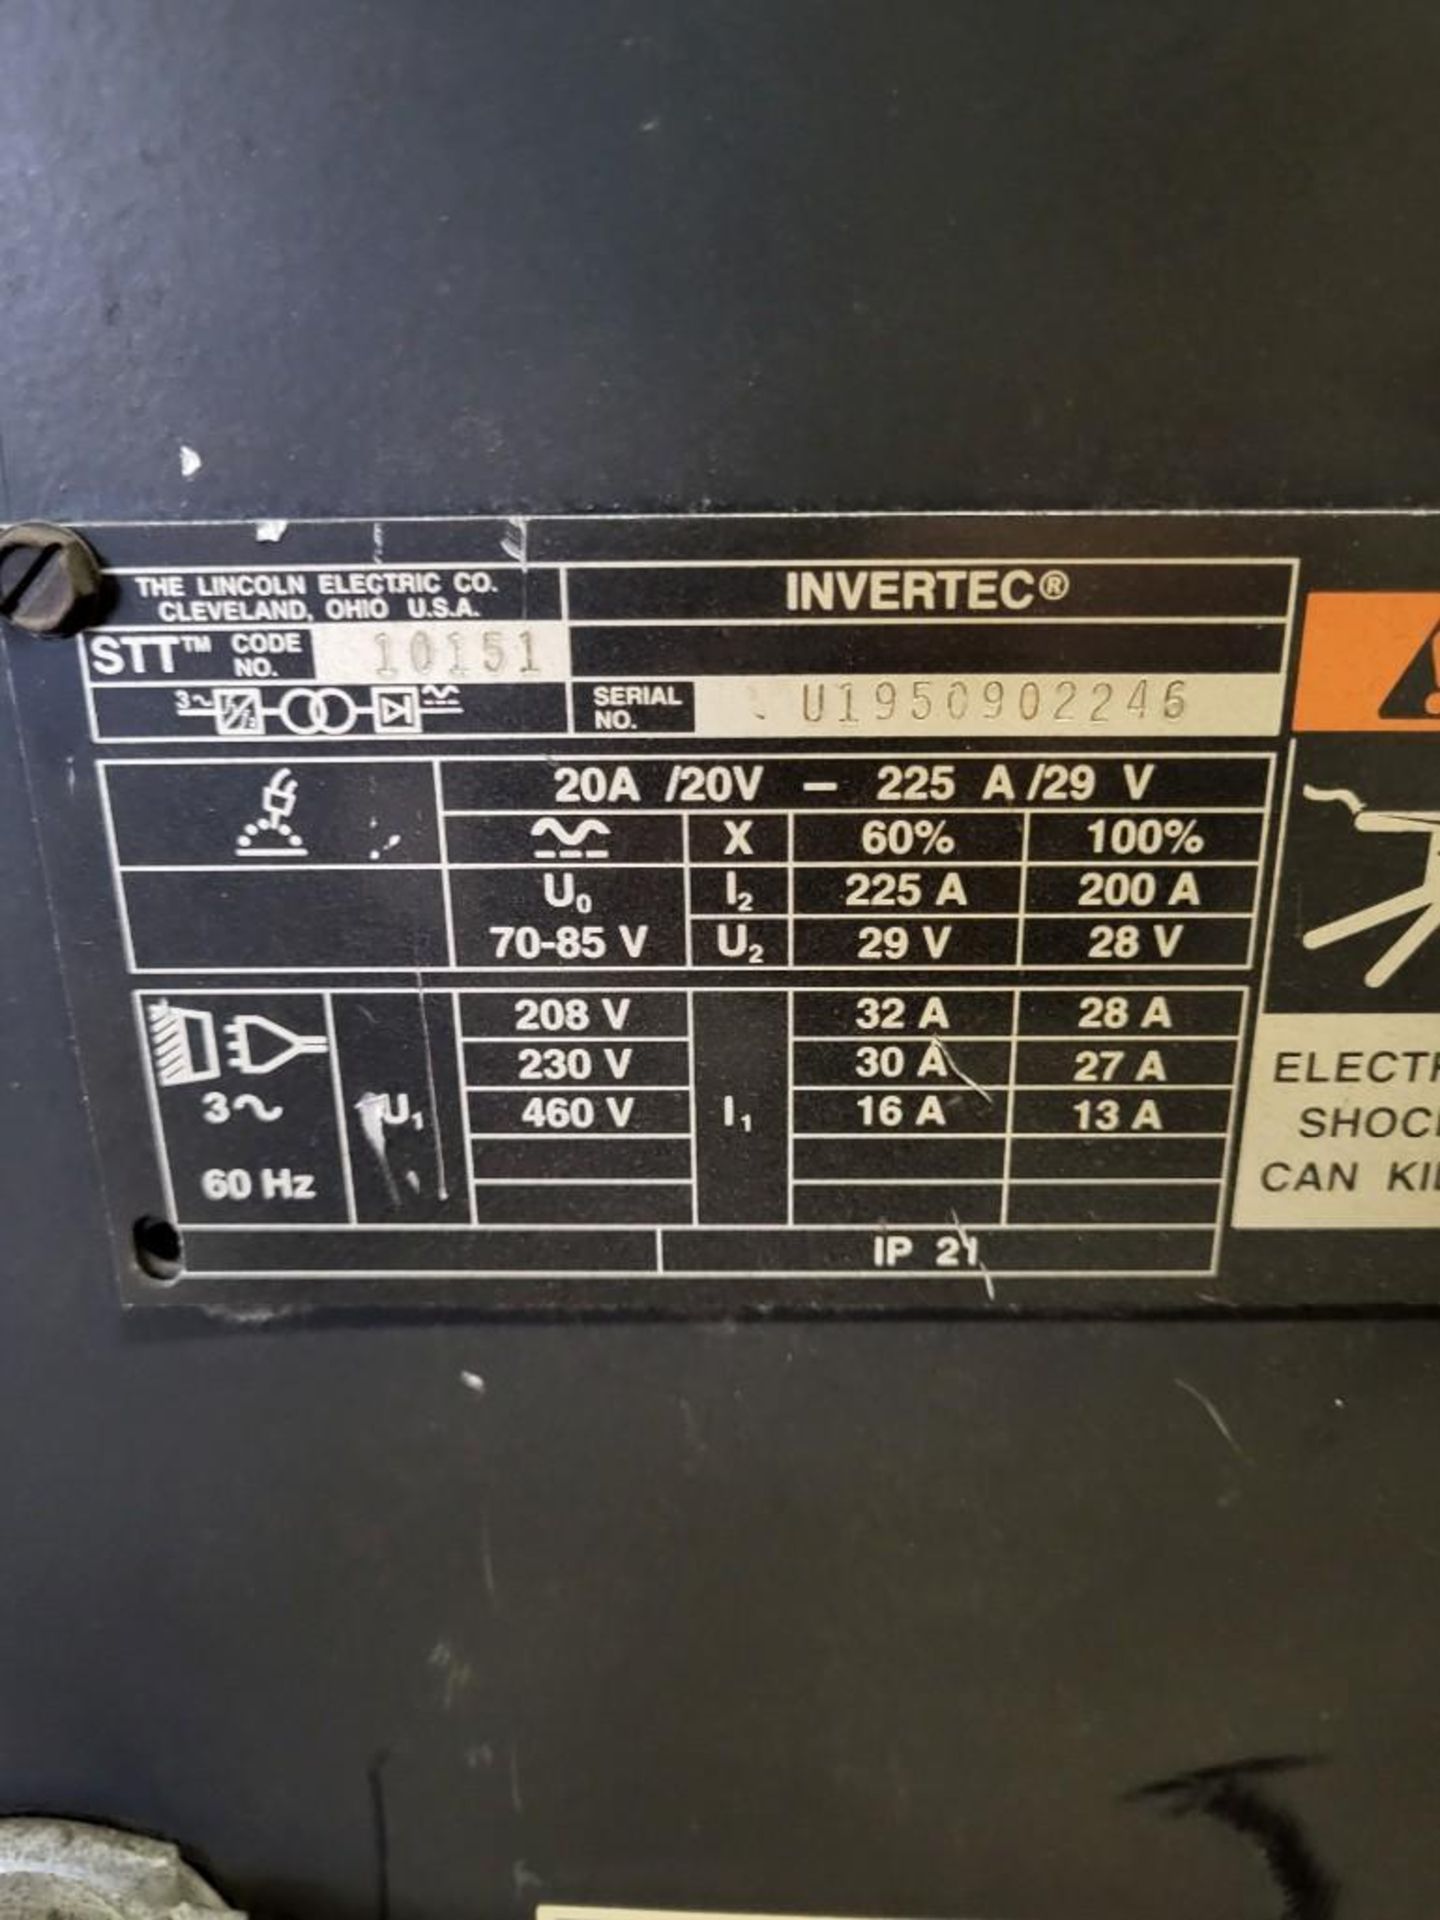 LINCOLN ELECTRIC INVERTEC STT MIG WELDER WITH LN-742 WIREFEEDER - Image 9 of 9